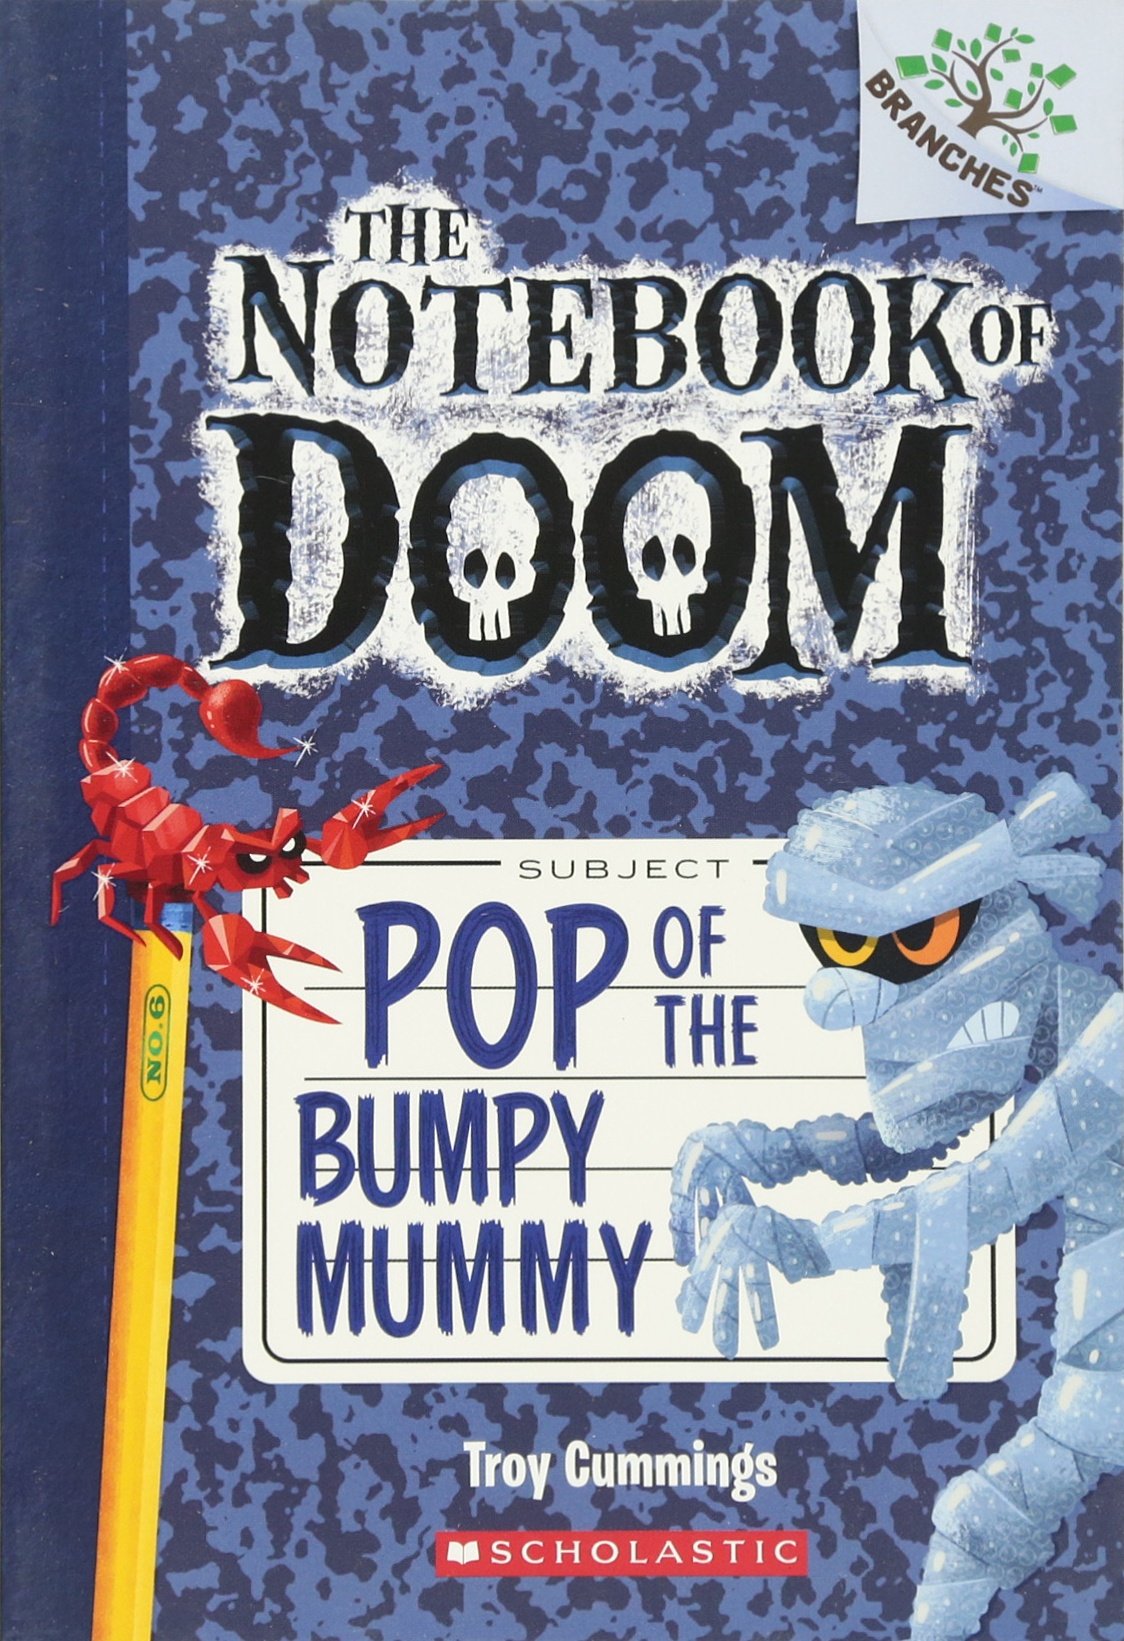 Pop of the Bumpy Mummy: A Branches Book (the Notebook of Doom #6), 6